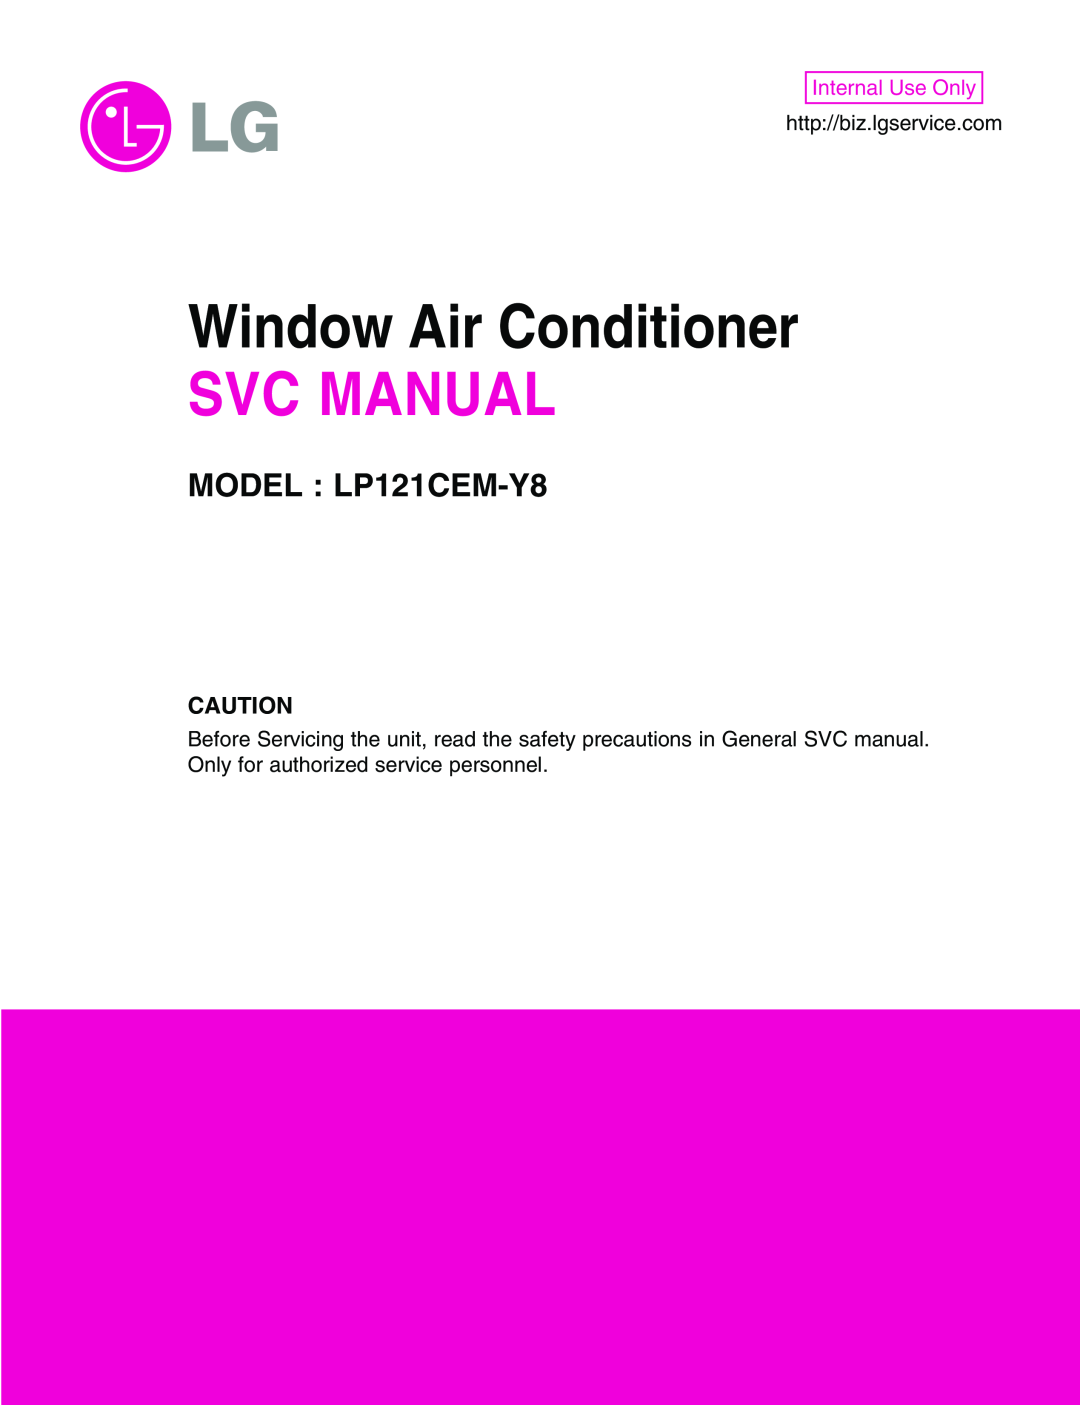 LG Electronics manual Window Air Conditioner, Svc Manual, MODEL LP121CEM-Y8, Internal Use Only 